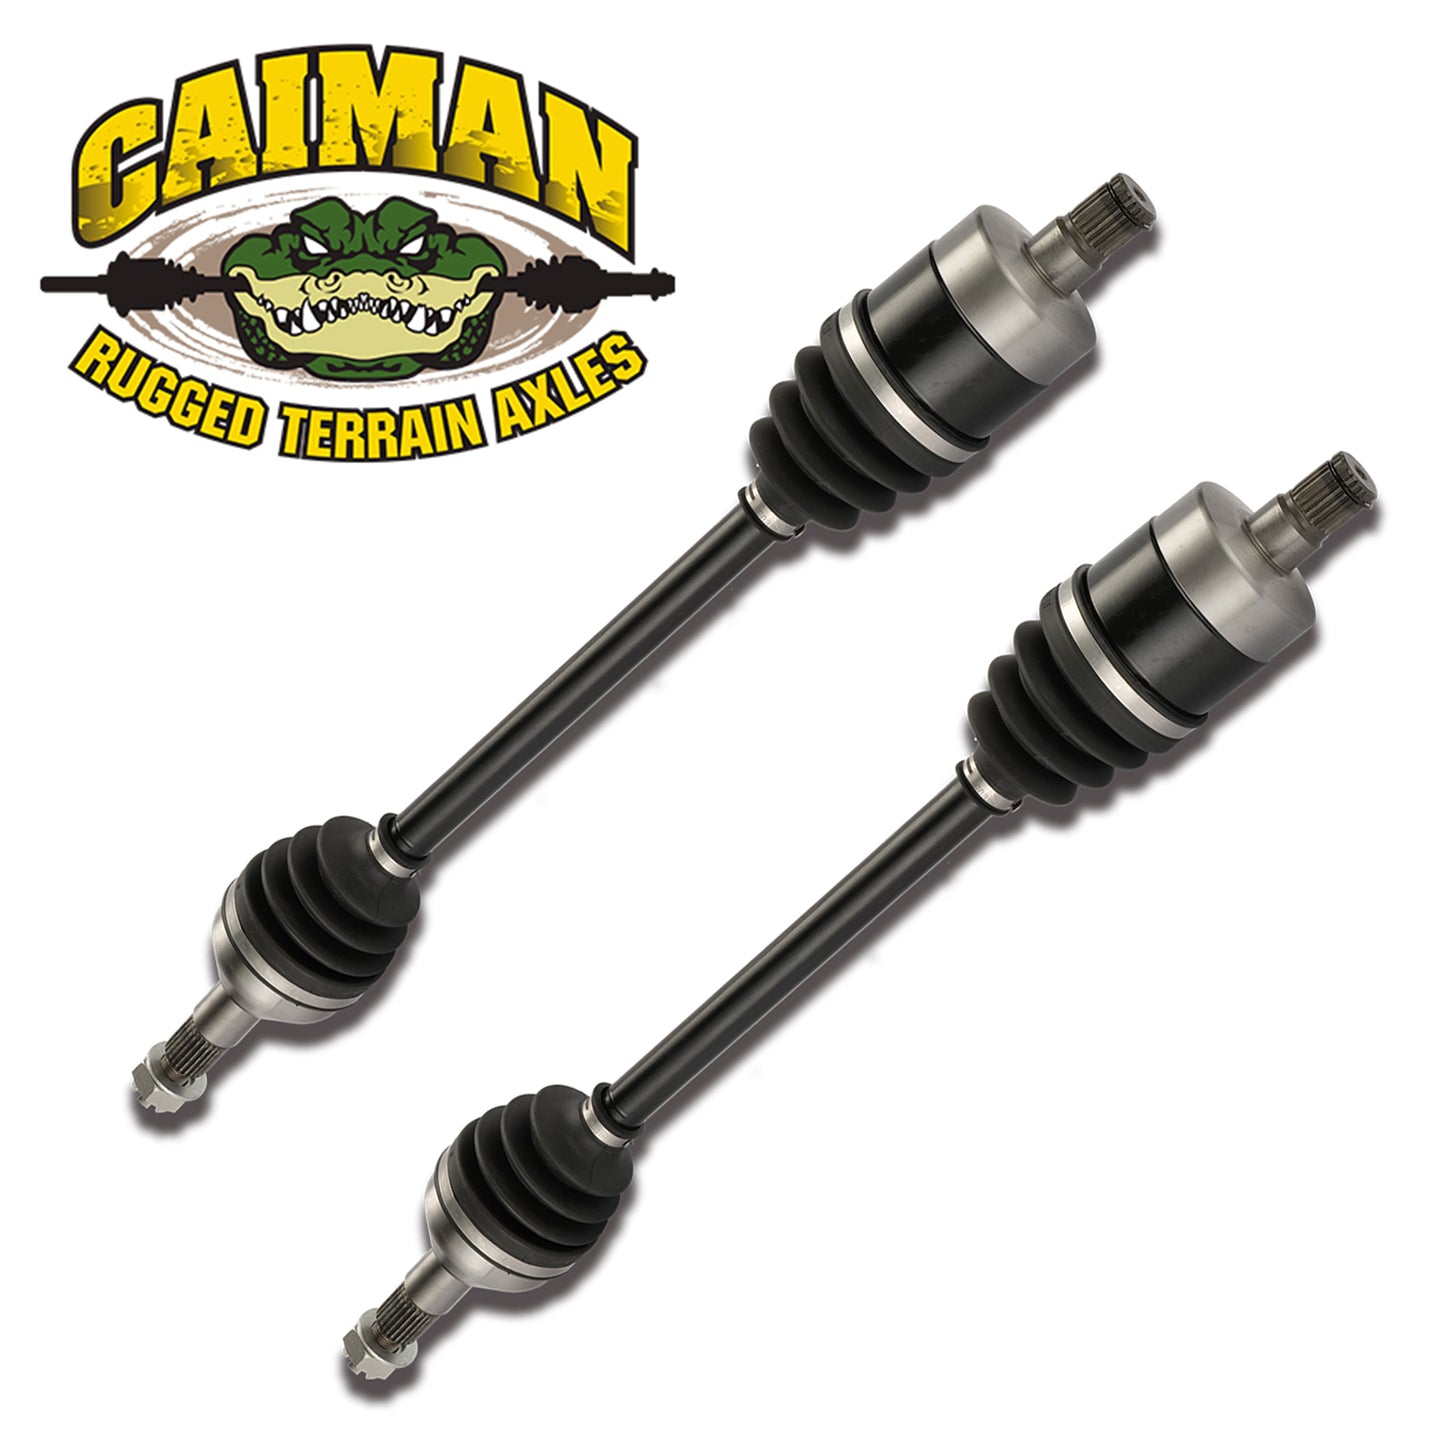 CAM-PO326 Front Left Drive Shaft CV Axle Compatible with 2007-2006 SPORTSMAN 450 (Built Before 7/25/06)